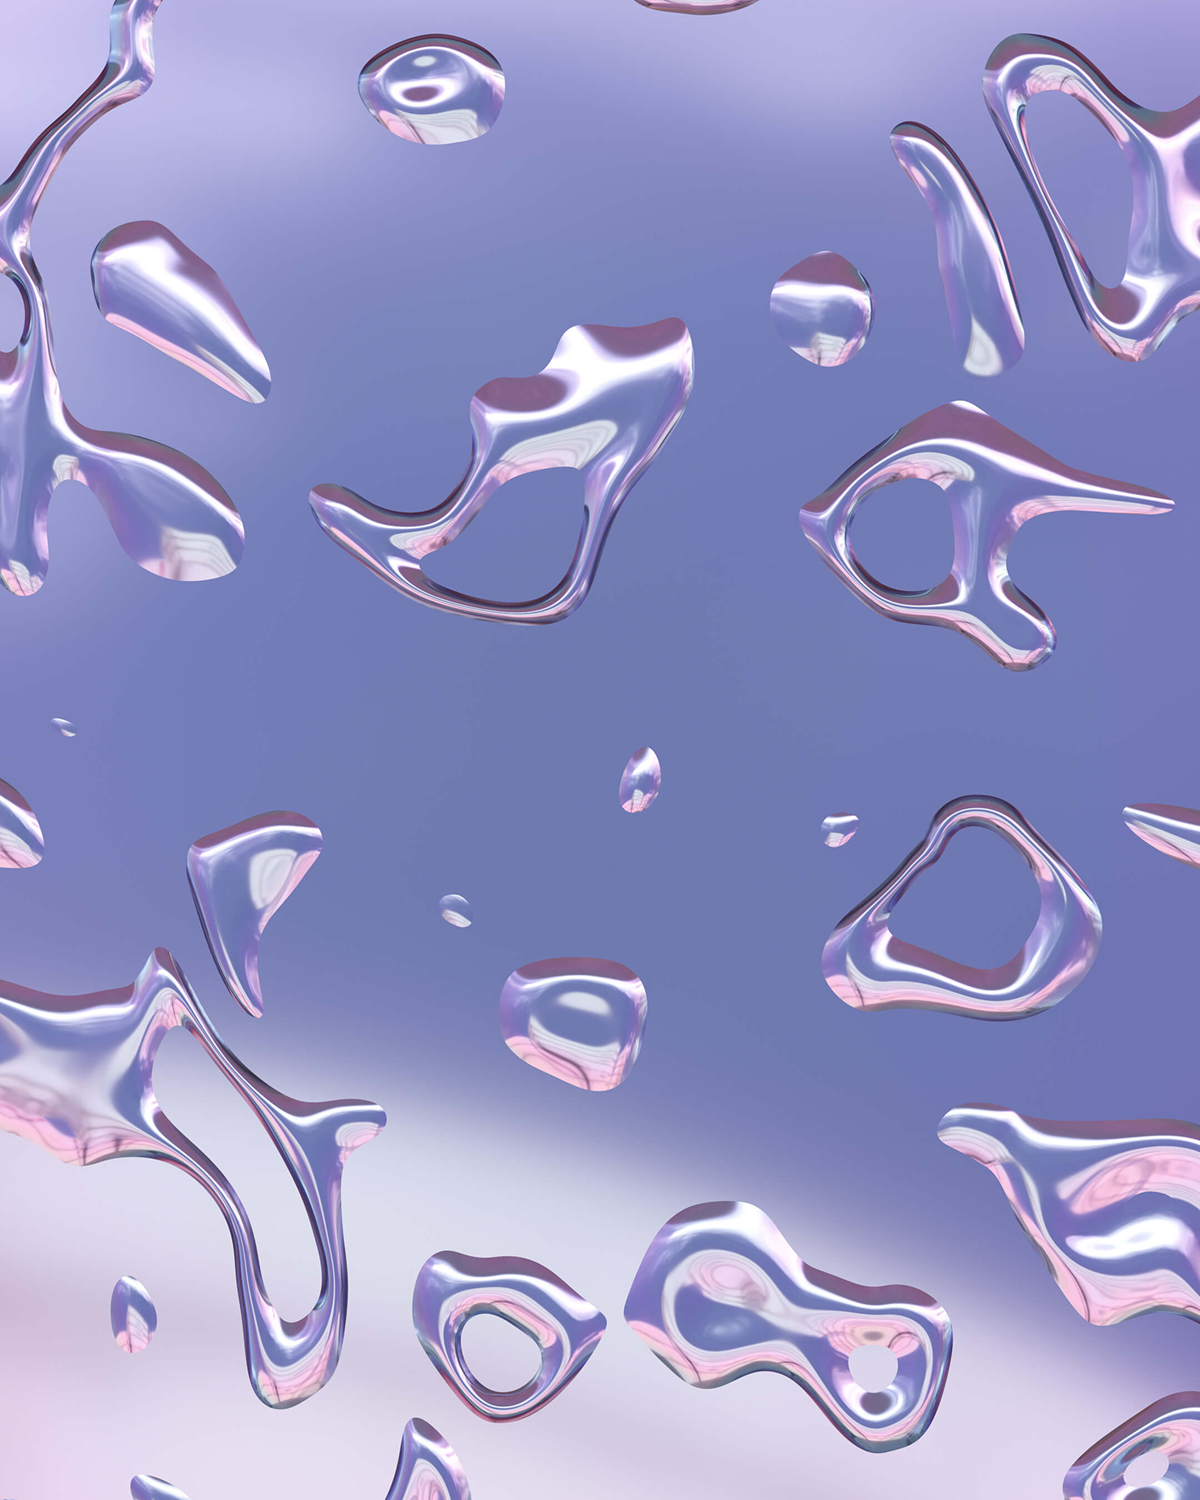 Digital art of translucent liquid droplets suspended in air with a soft lavender background, reflecting light to create a serene, weightless, and ethereal atmosphere.